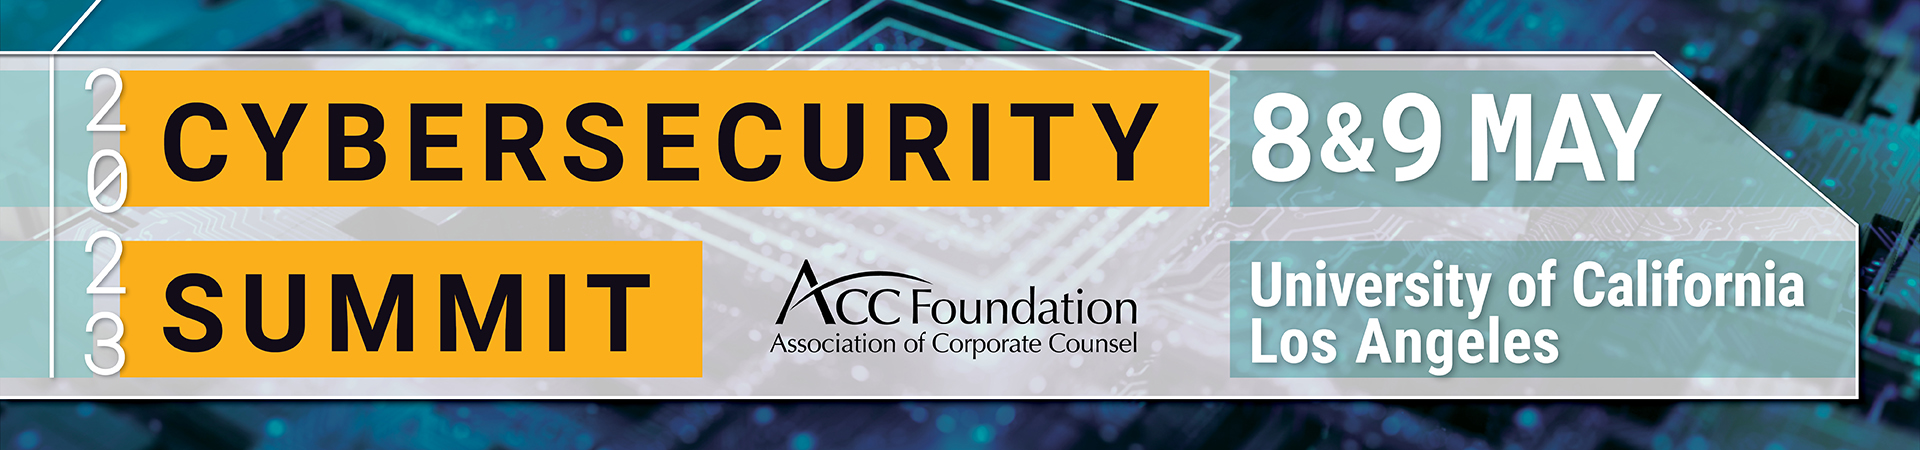 2023 cybersecurity summit ACC Foundation Association of Corporate Counsel 8&9 May University of California Los Angeles